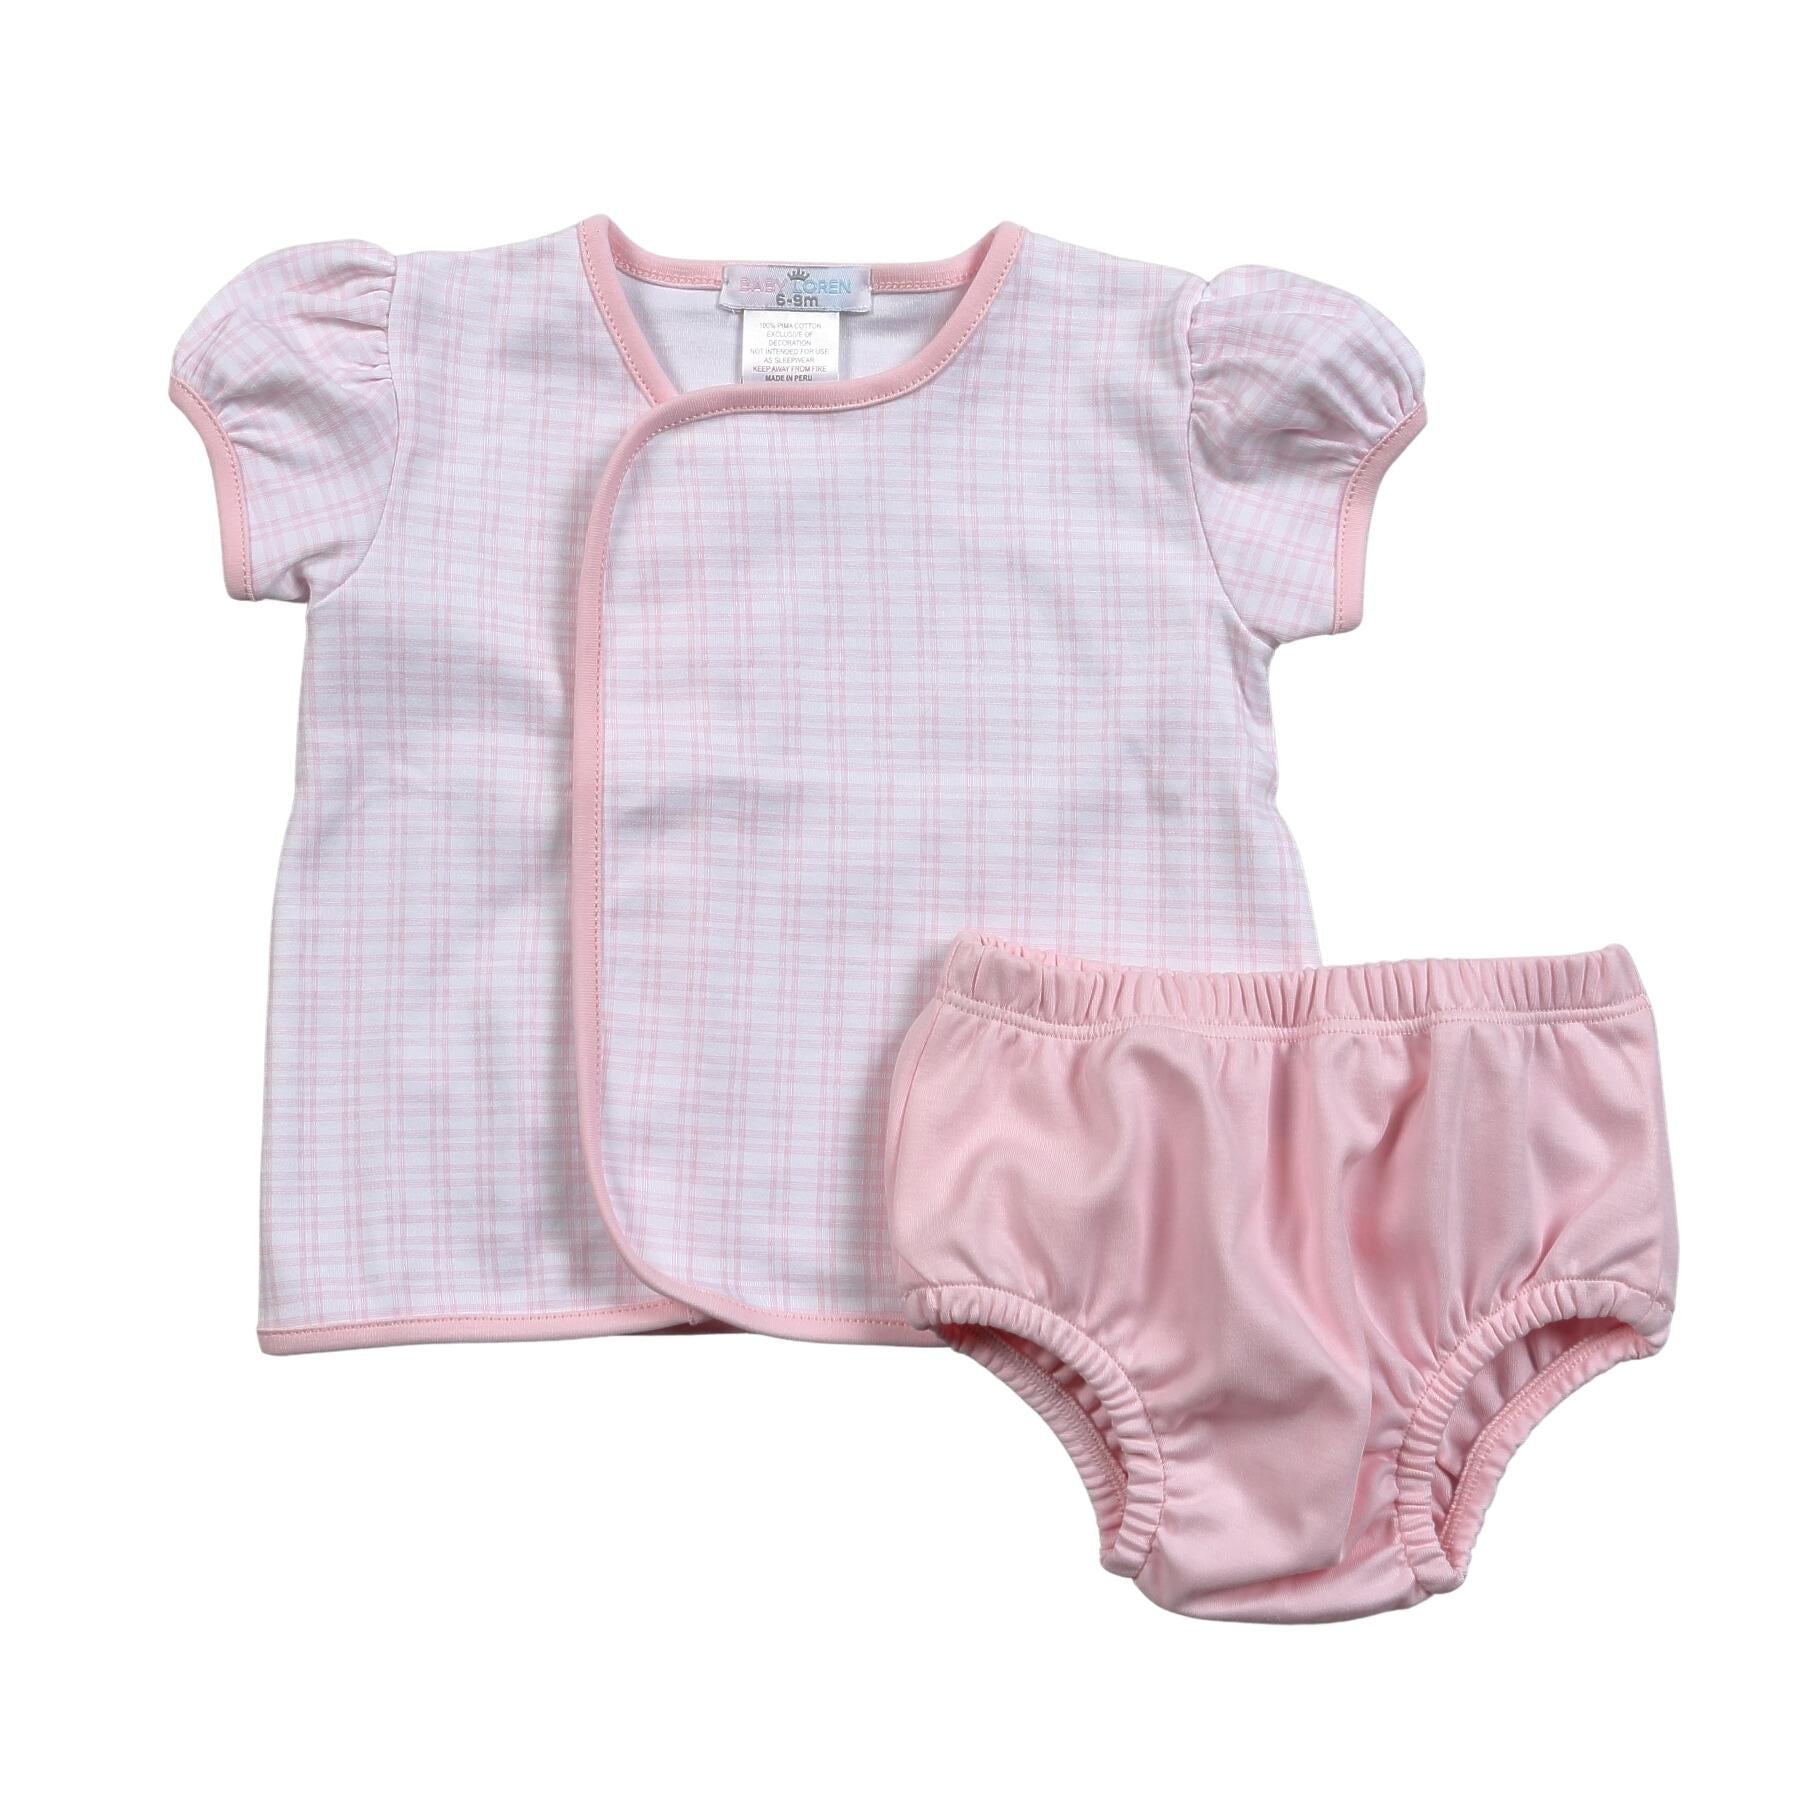 Pink Plaid Diaper Cover Set (Baby)